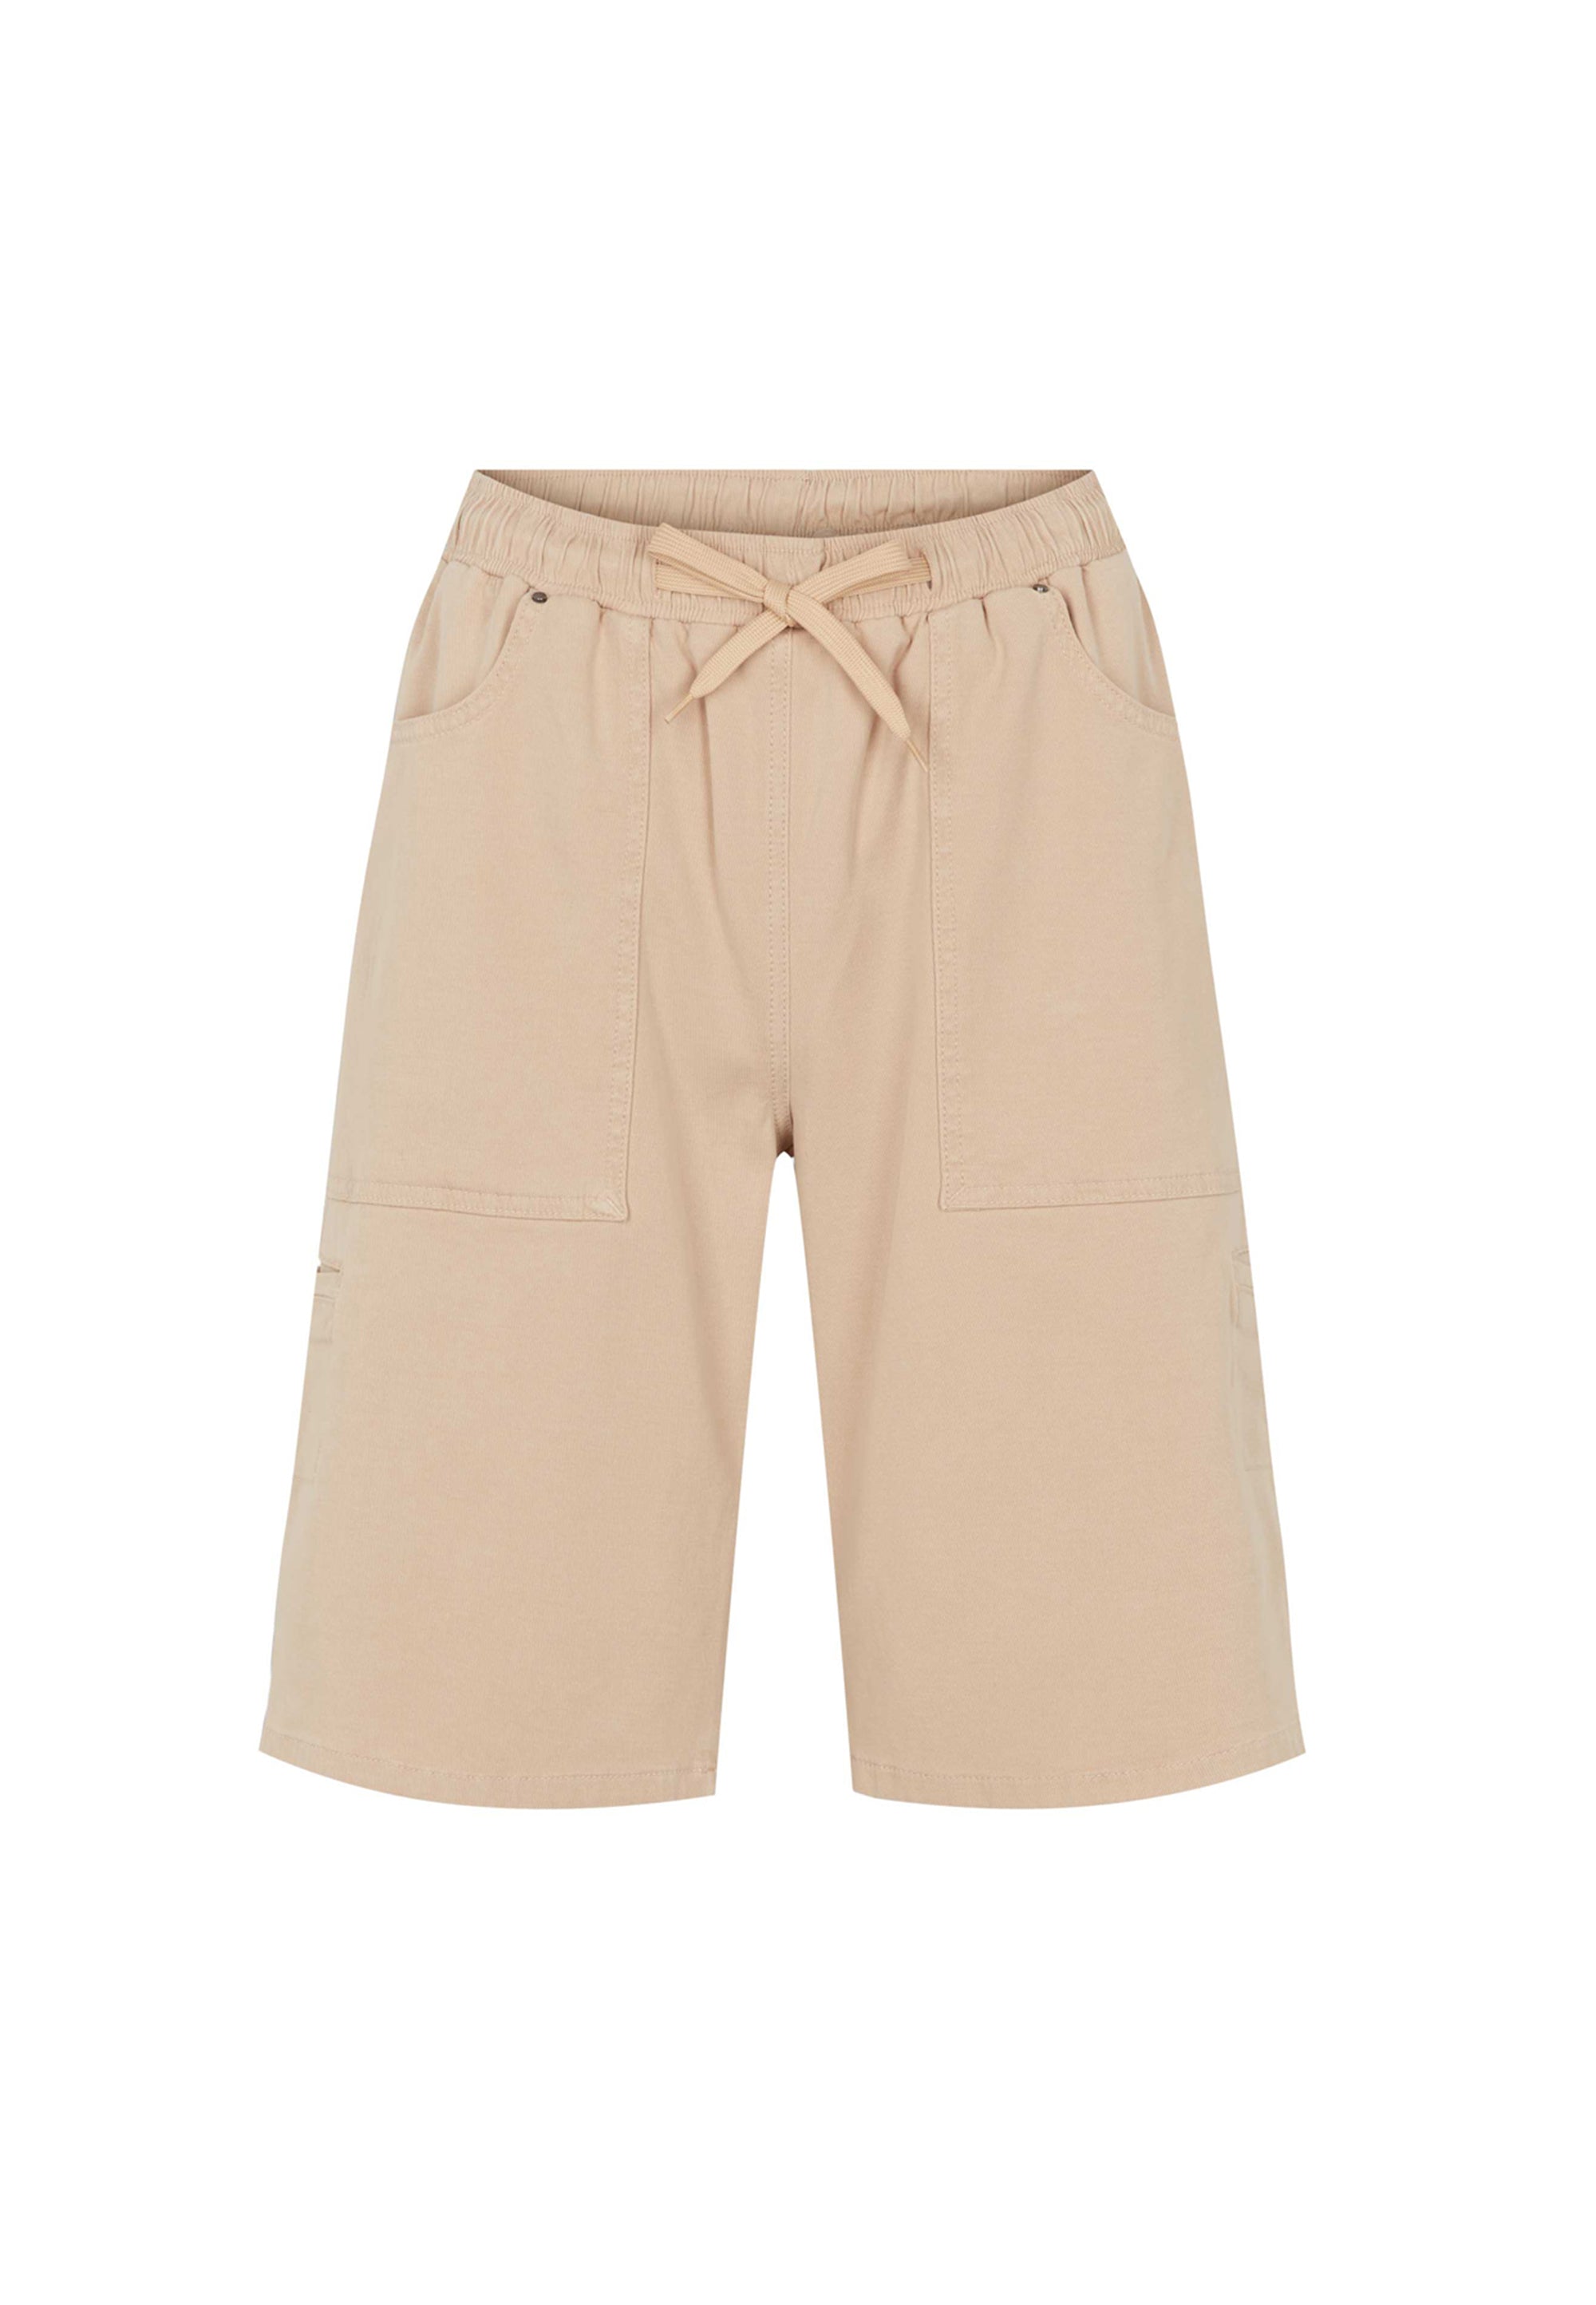 LAURIE Ofelia Cargo Relaxed Shorts Trousers RELAXED 26000 Safari